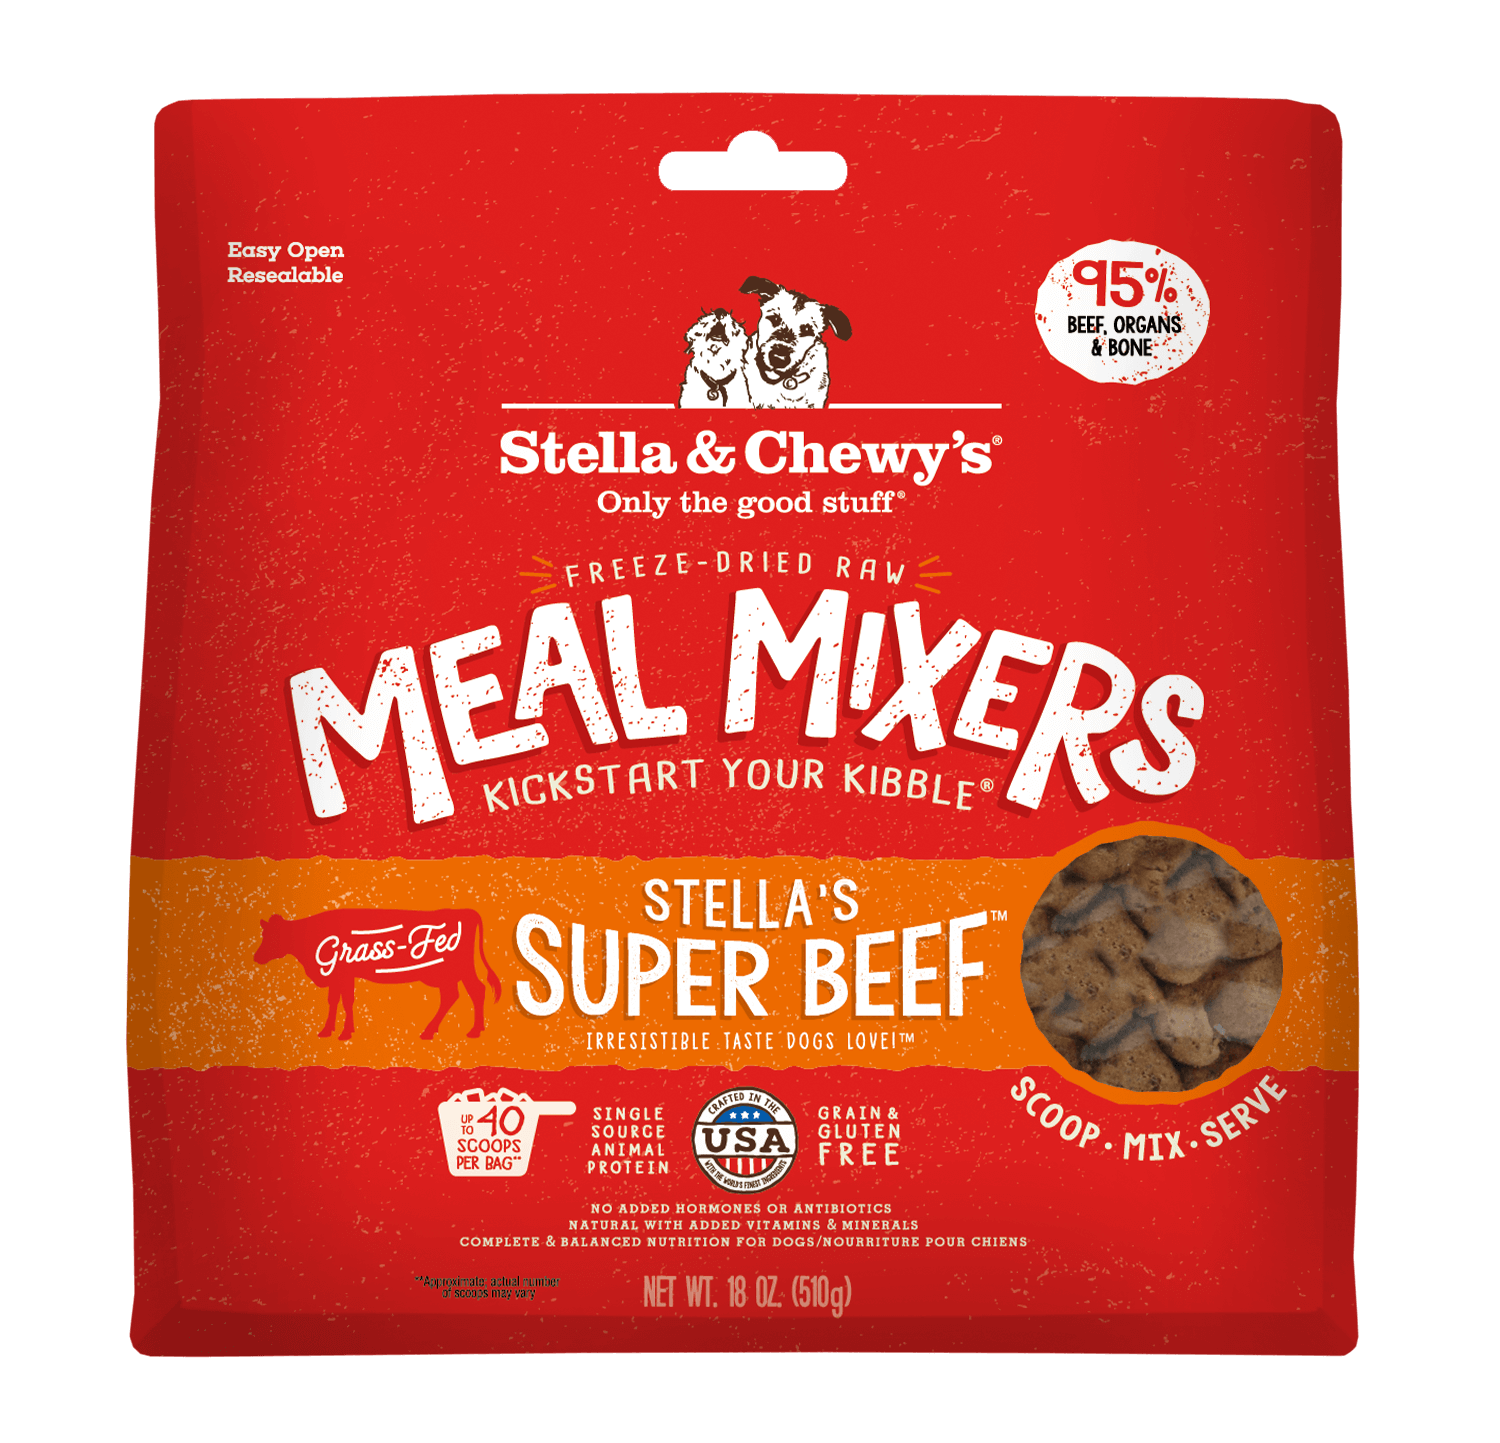 Stella & Chewy's Meal Mixer Beef